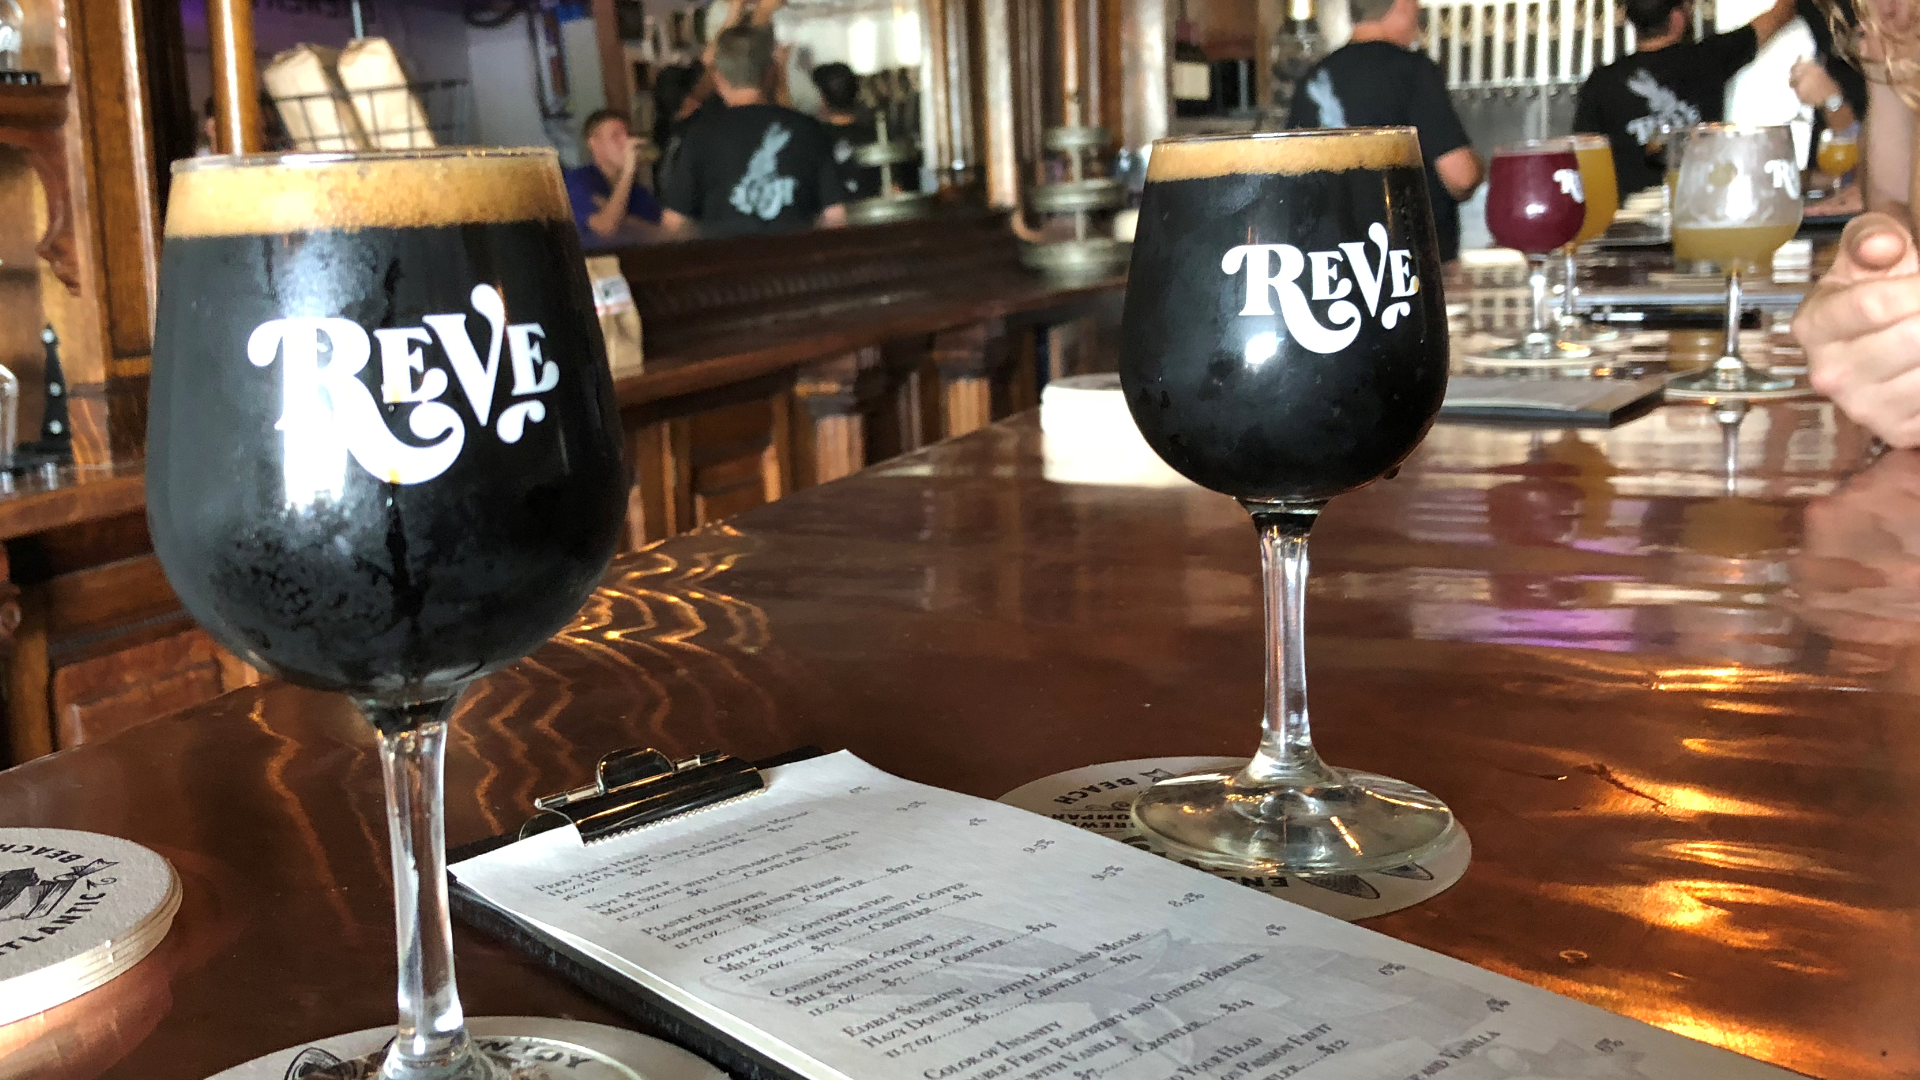 Reve Brewing Co. is a newer brewery that just opened up in Atlantic Beach, focusing on sours, IPAs and stouts. Though it's not exactly food, the owner tells me all of the beers are culinarily inspired, taking fruits, vanillas, spices.